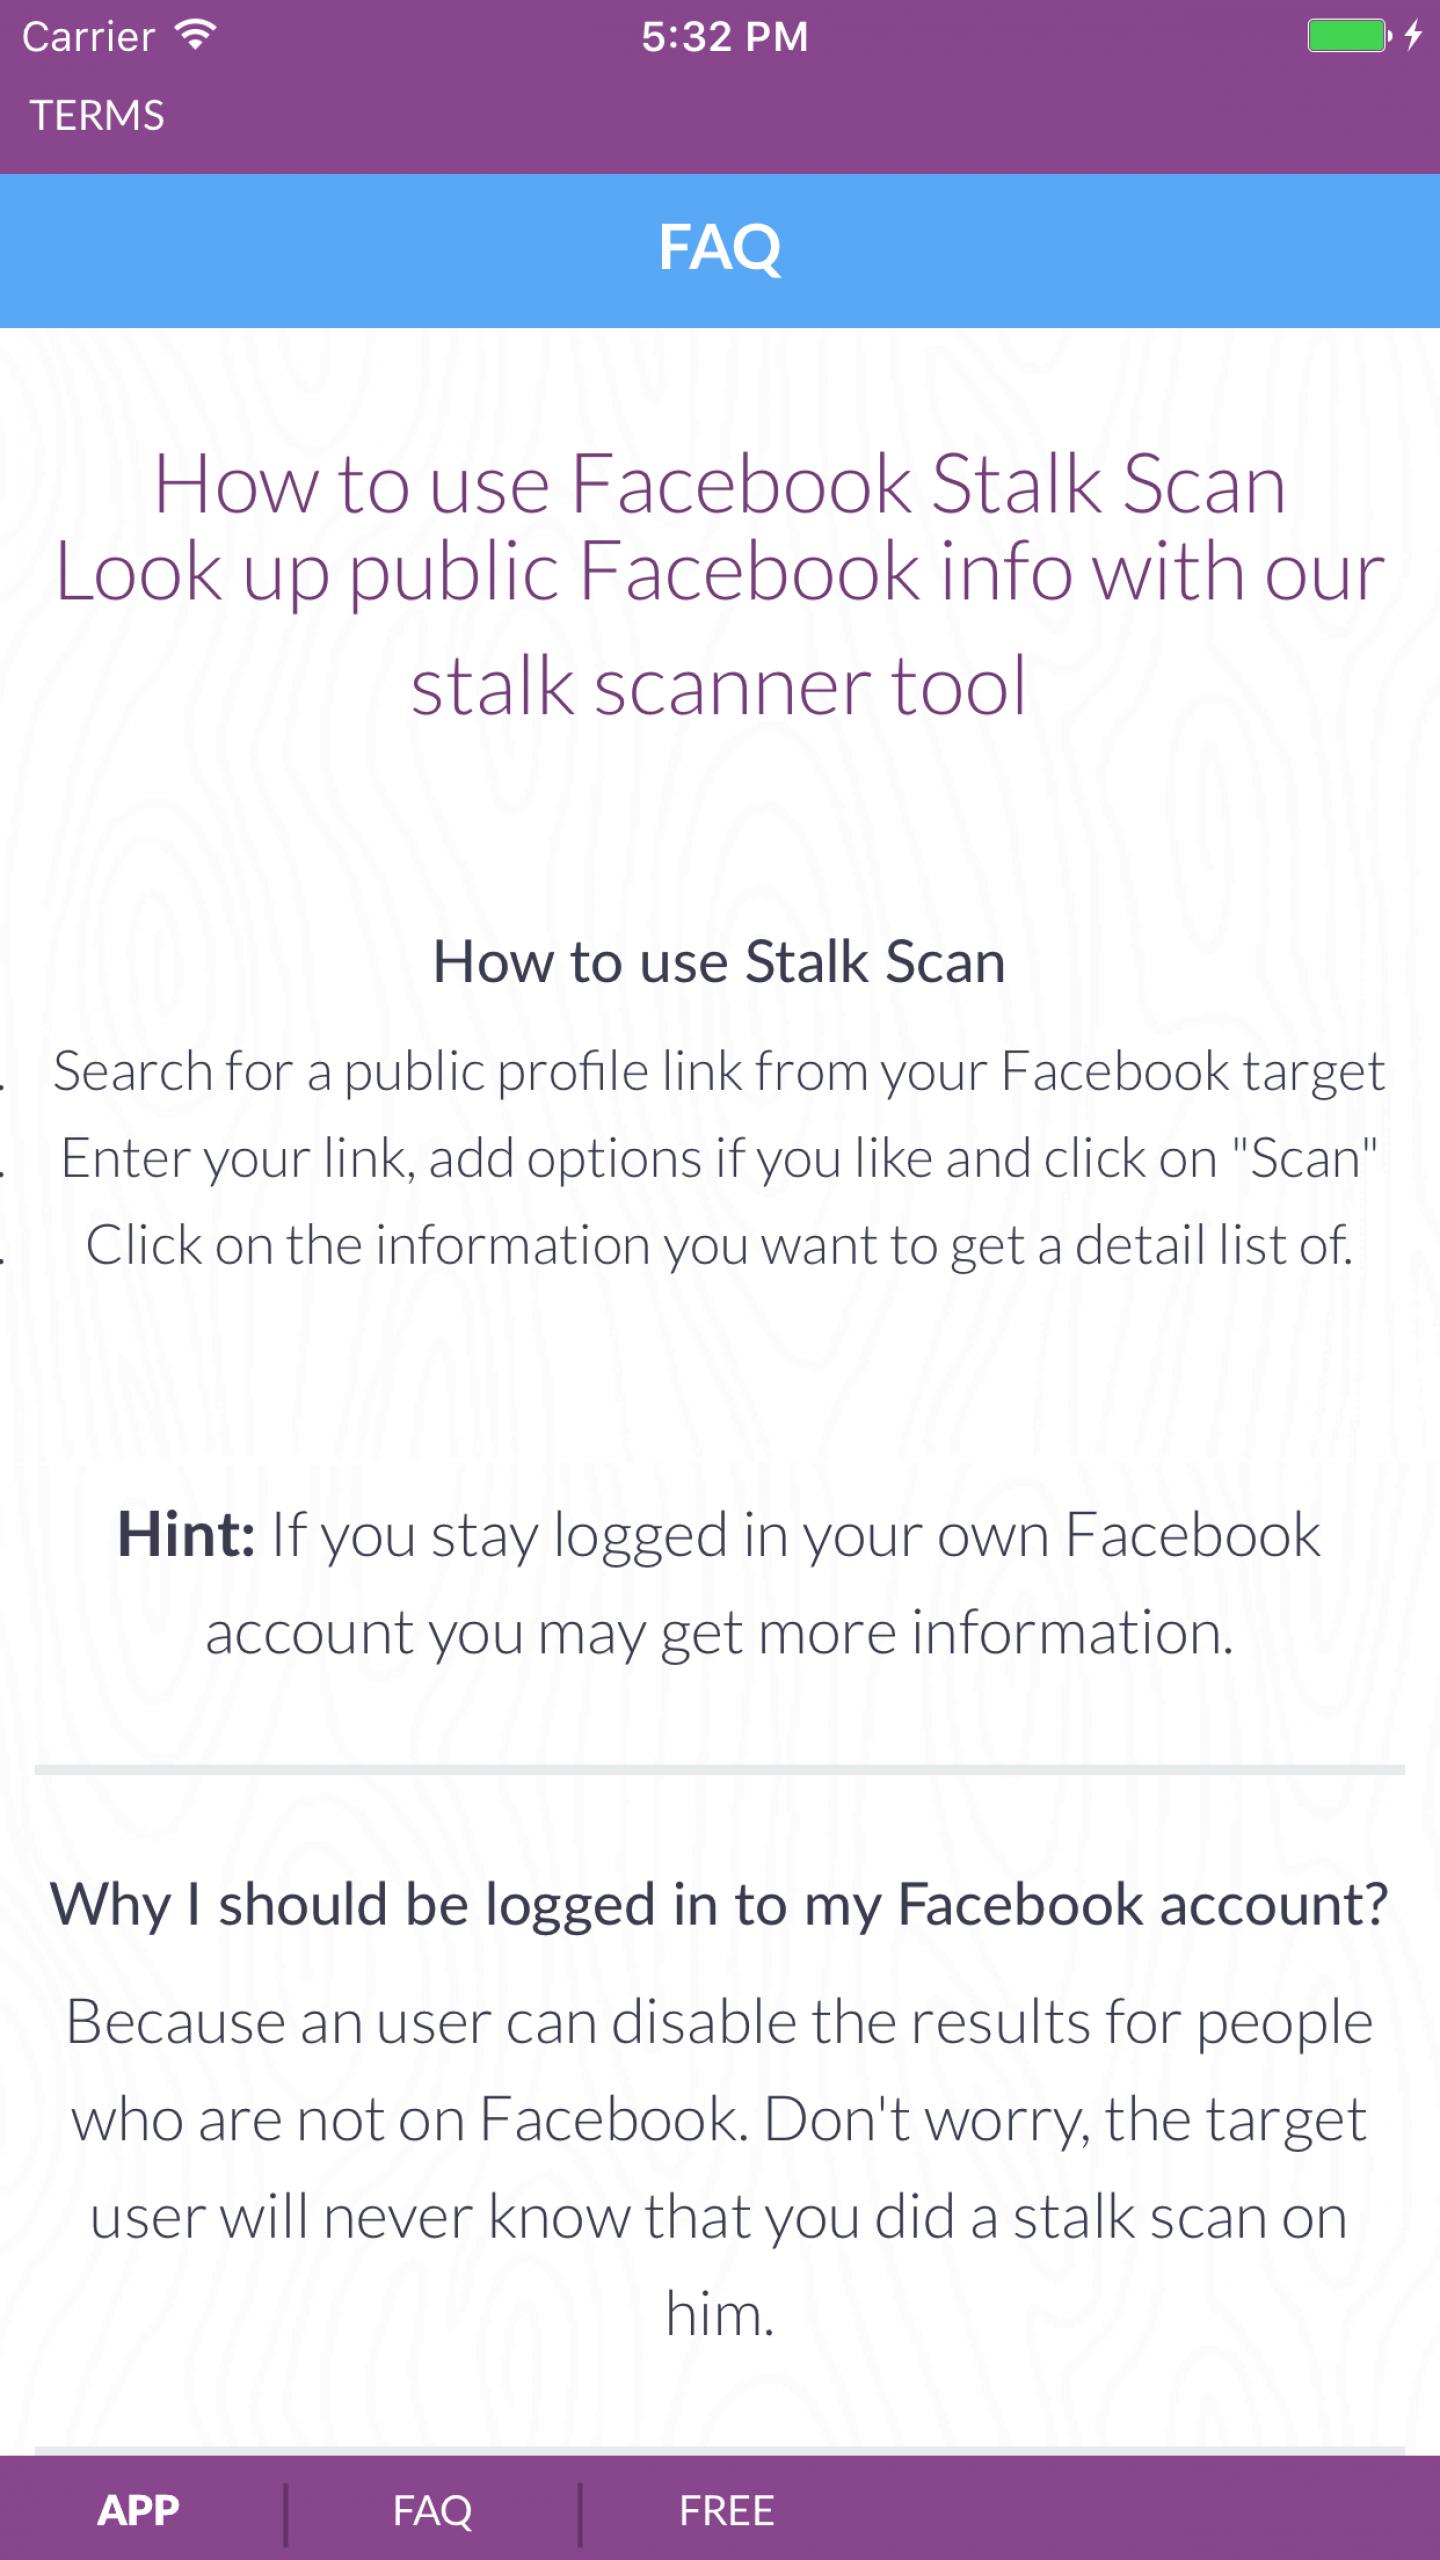 Stalk Scan for Android - APK Download